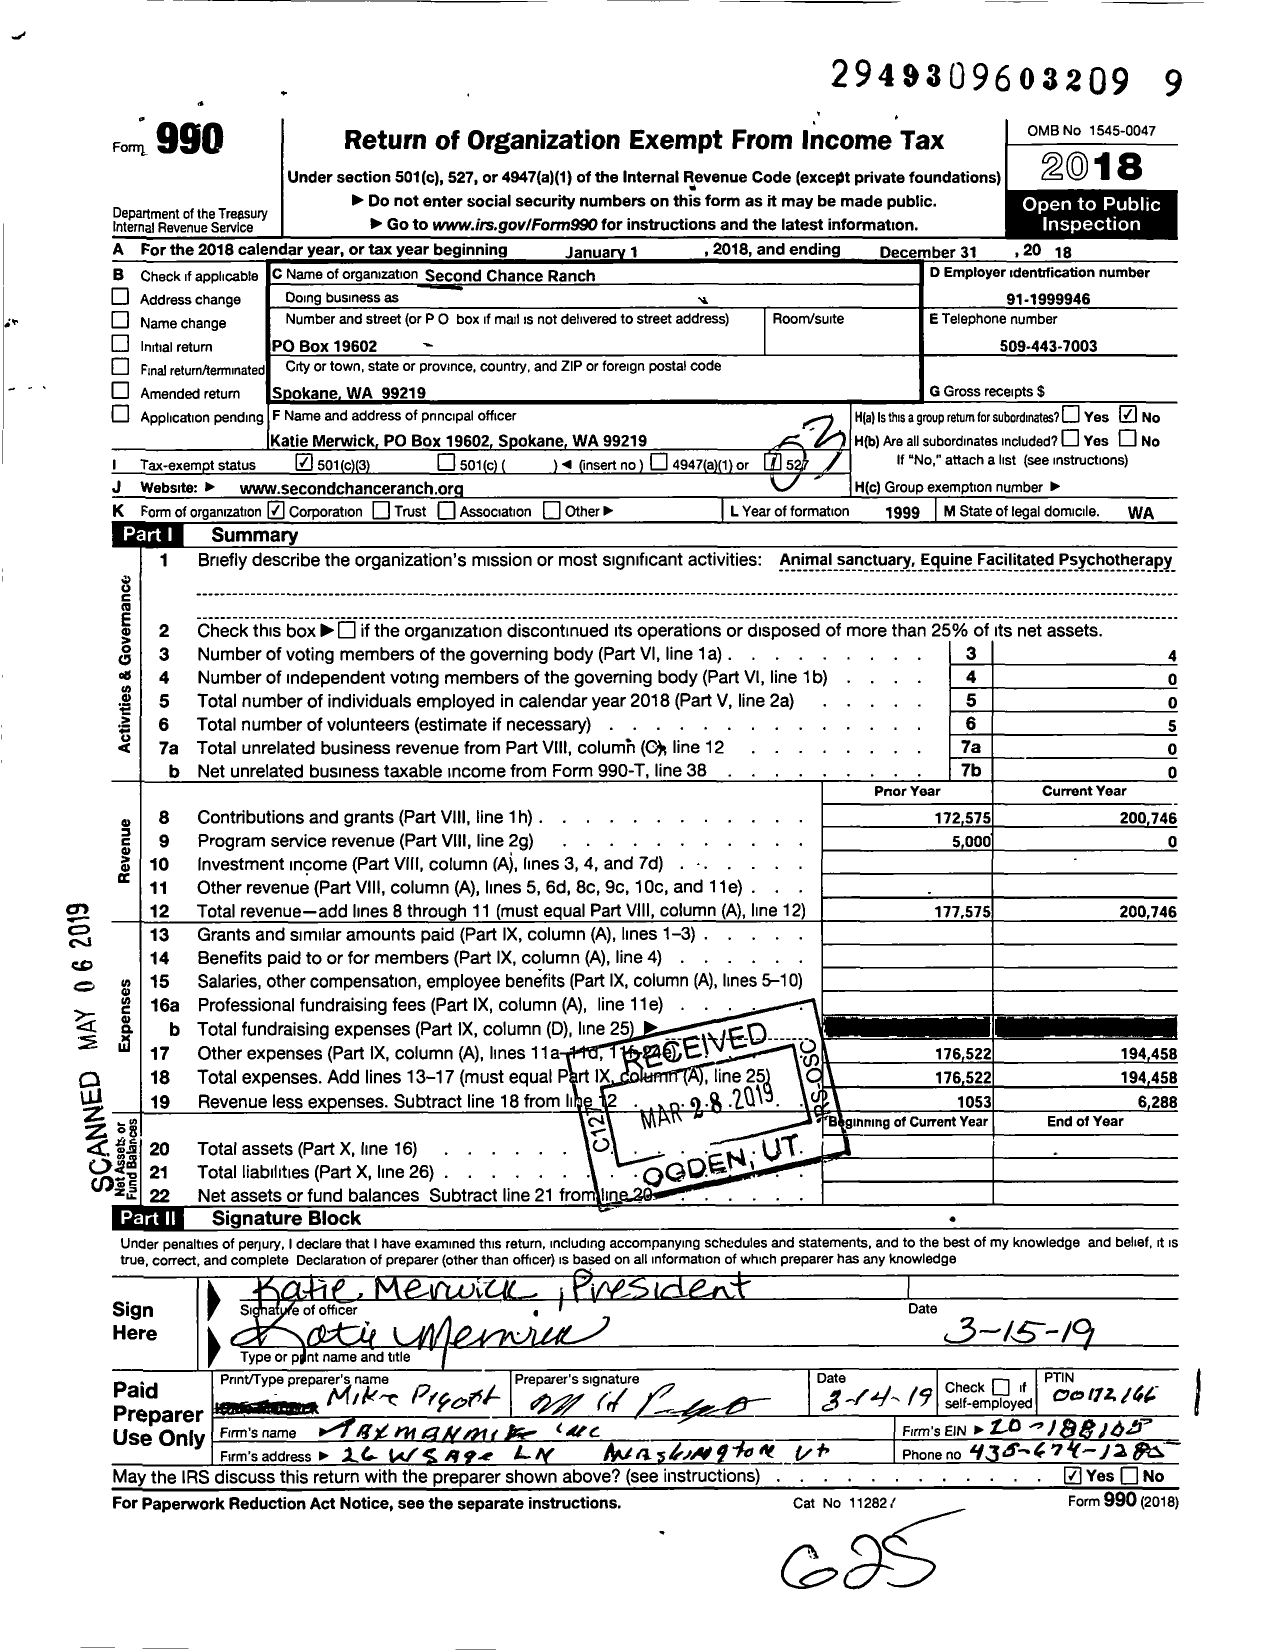 Image of first page of 2018 Form 990 for Second Chance Ranch (SCR)